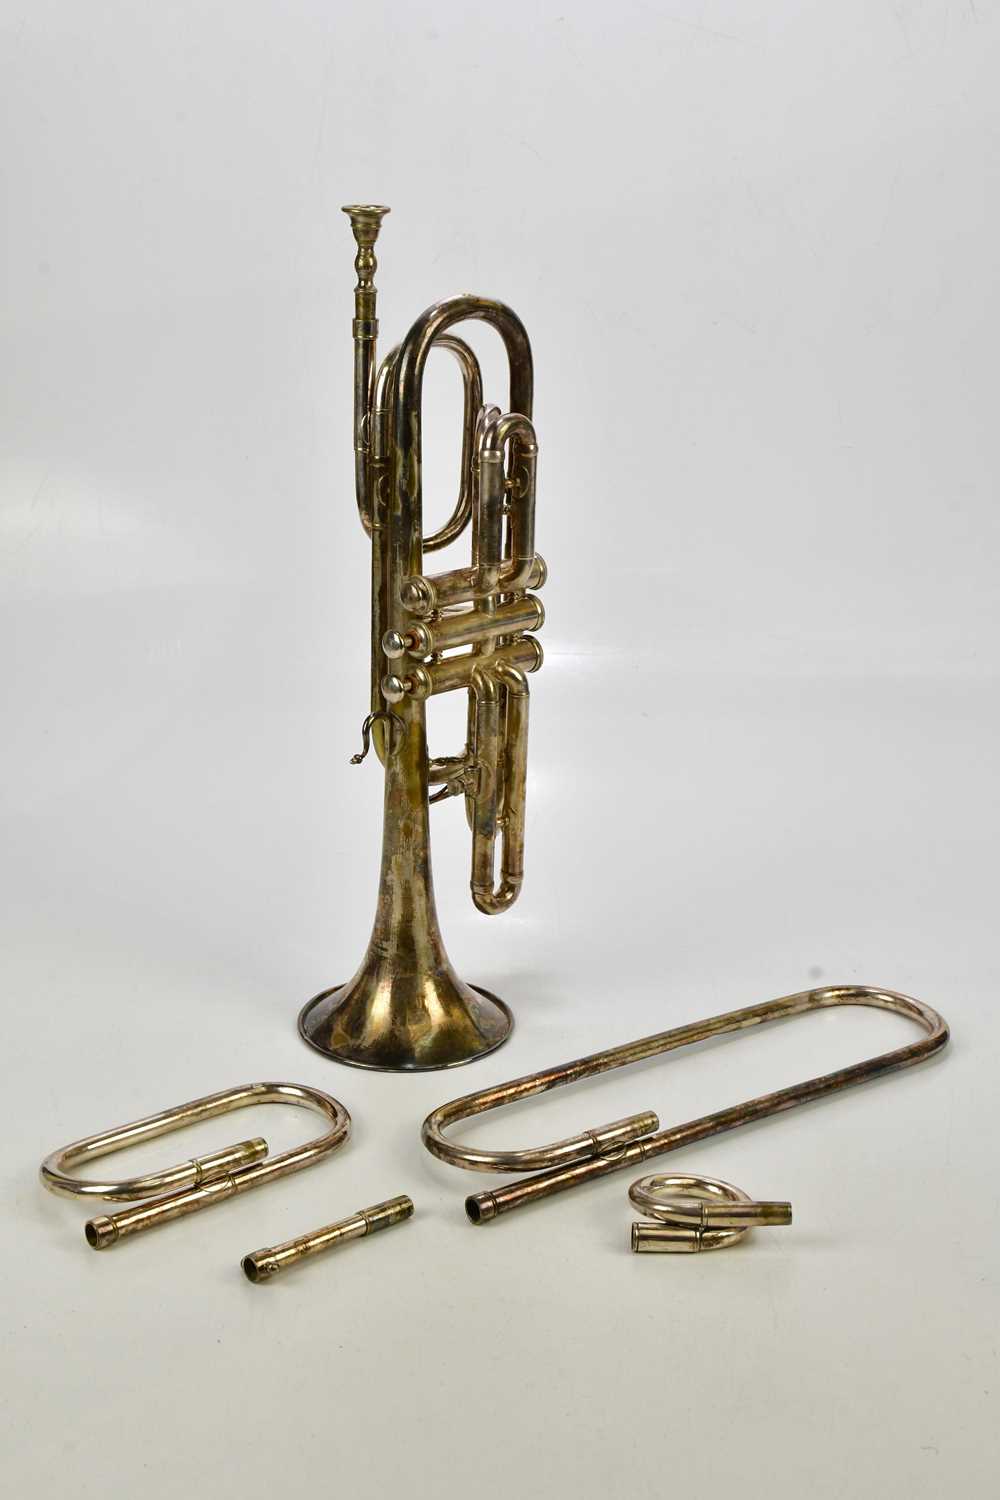 LAFLEUR, LONDON; a nickle plated trumpet with spare parts, cased.